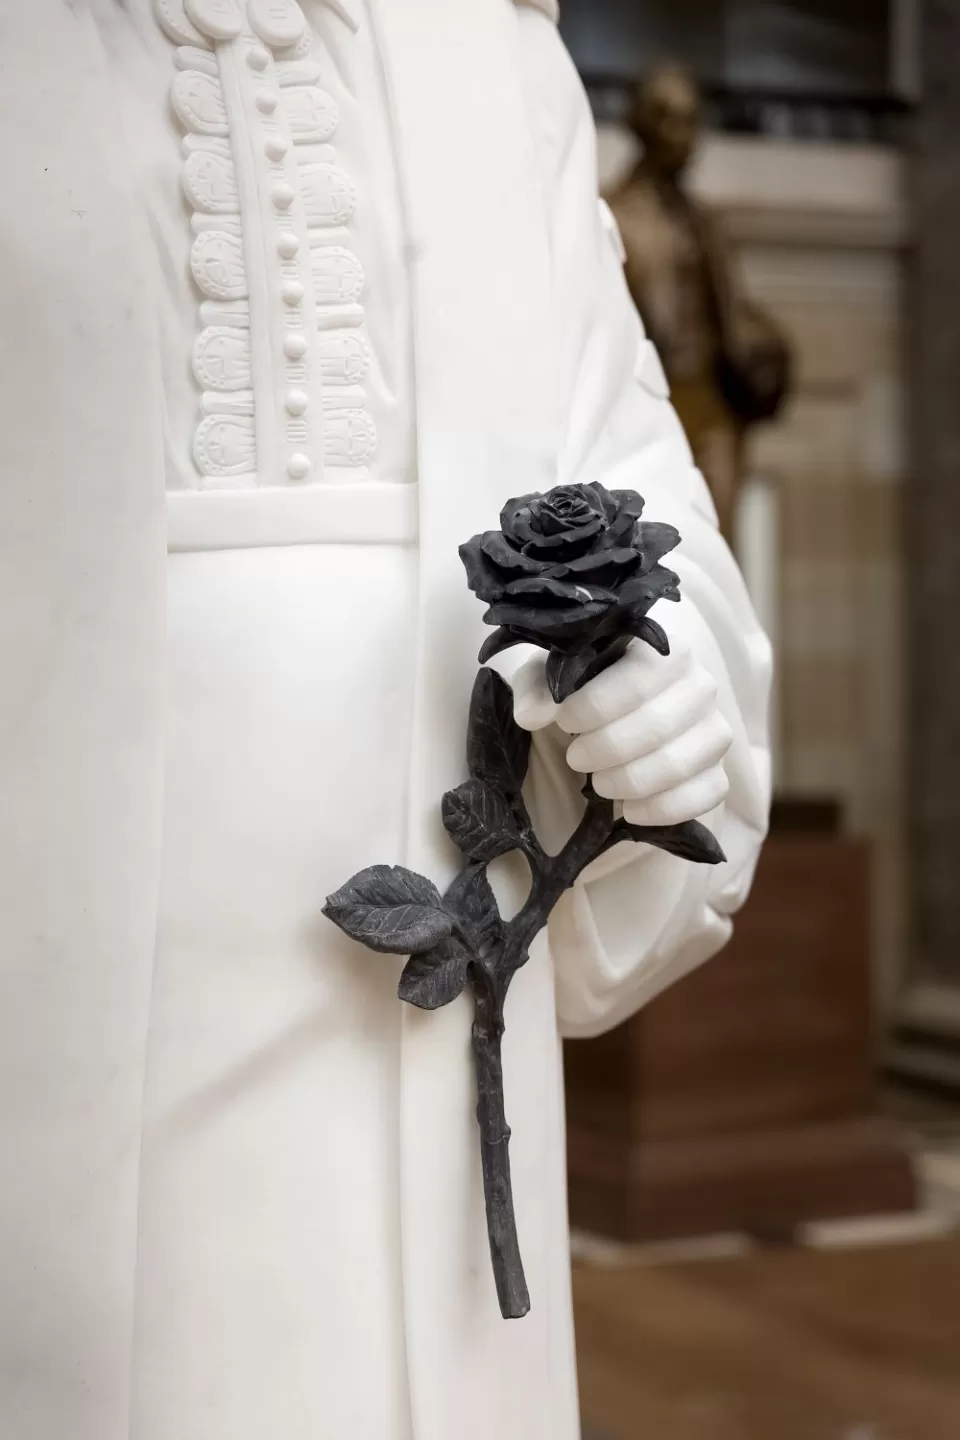 Close-up image of the black rose in Bethune's statue.